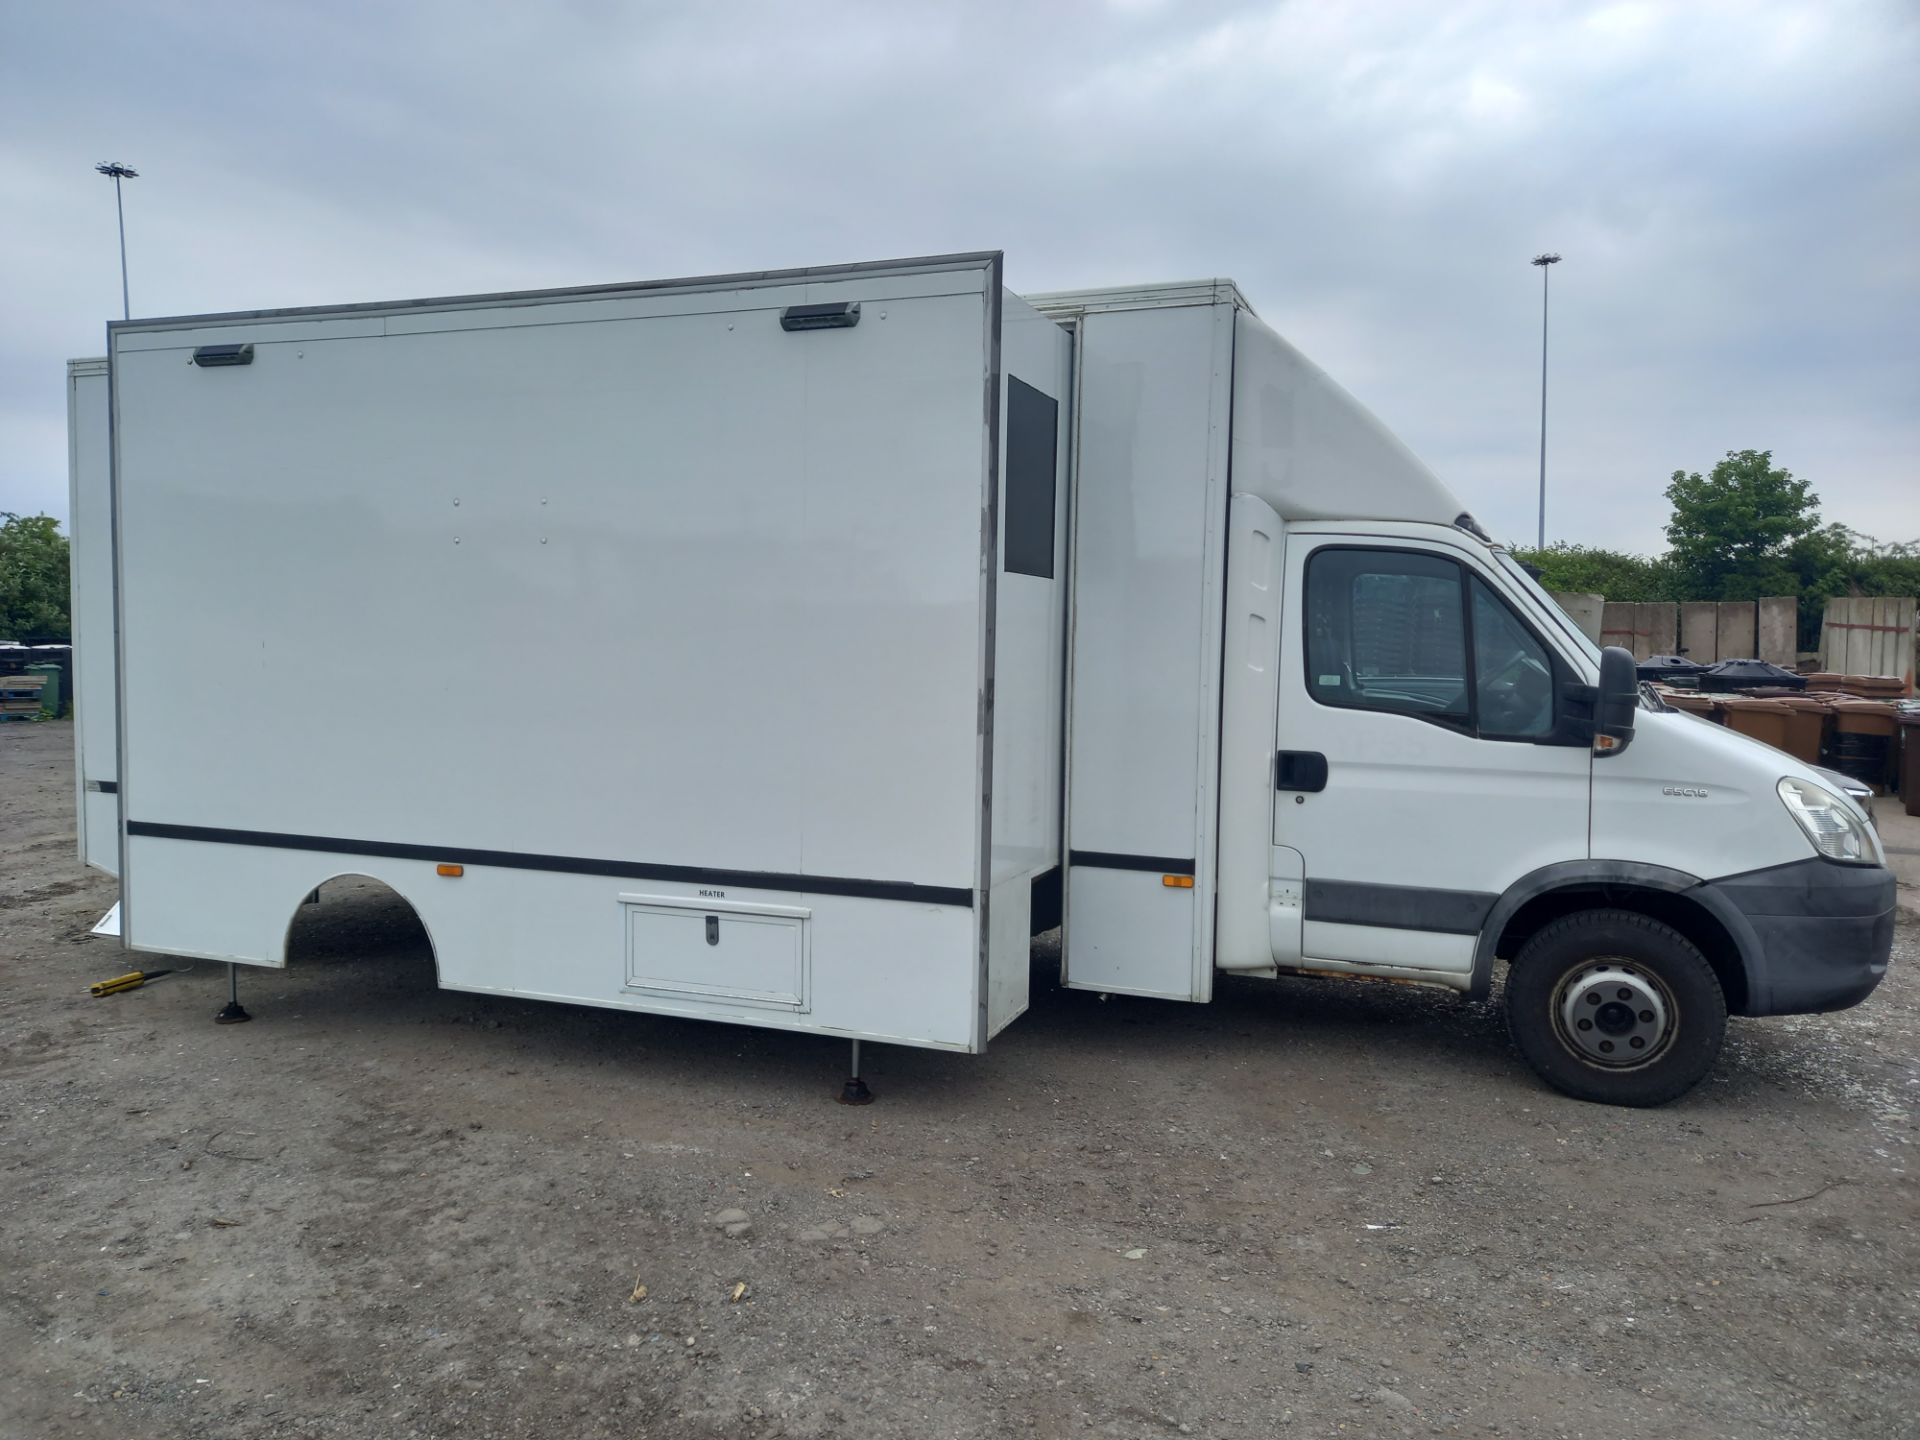 Community Outreach Vehicle/Camper Van Conversion. - Image 4 of 19